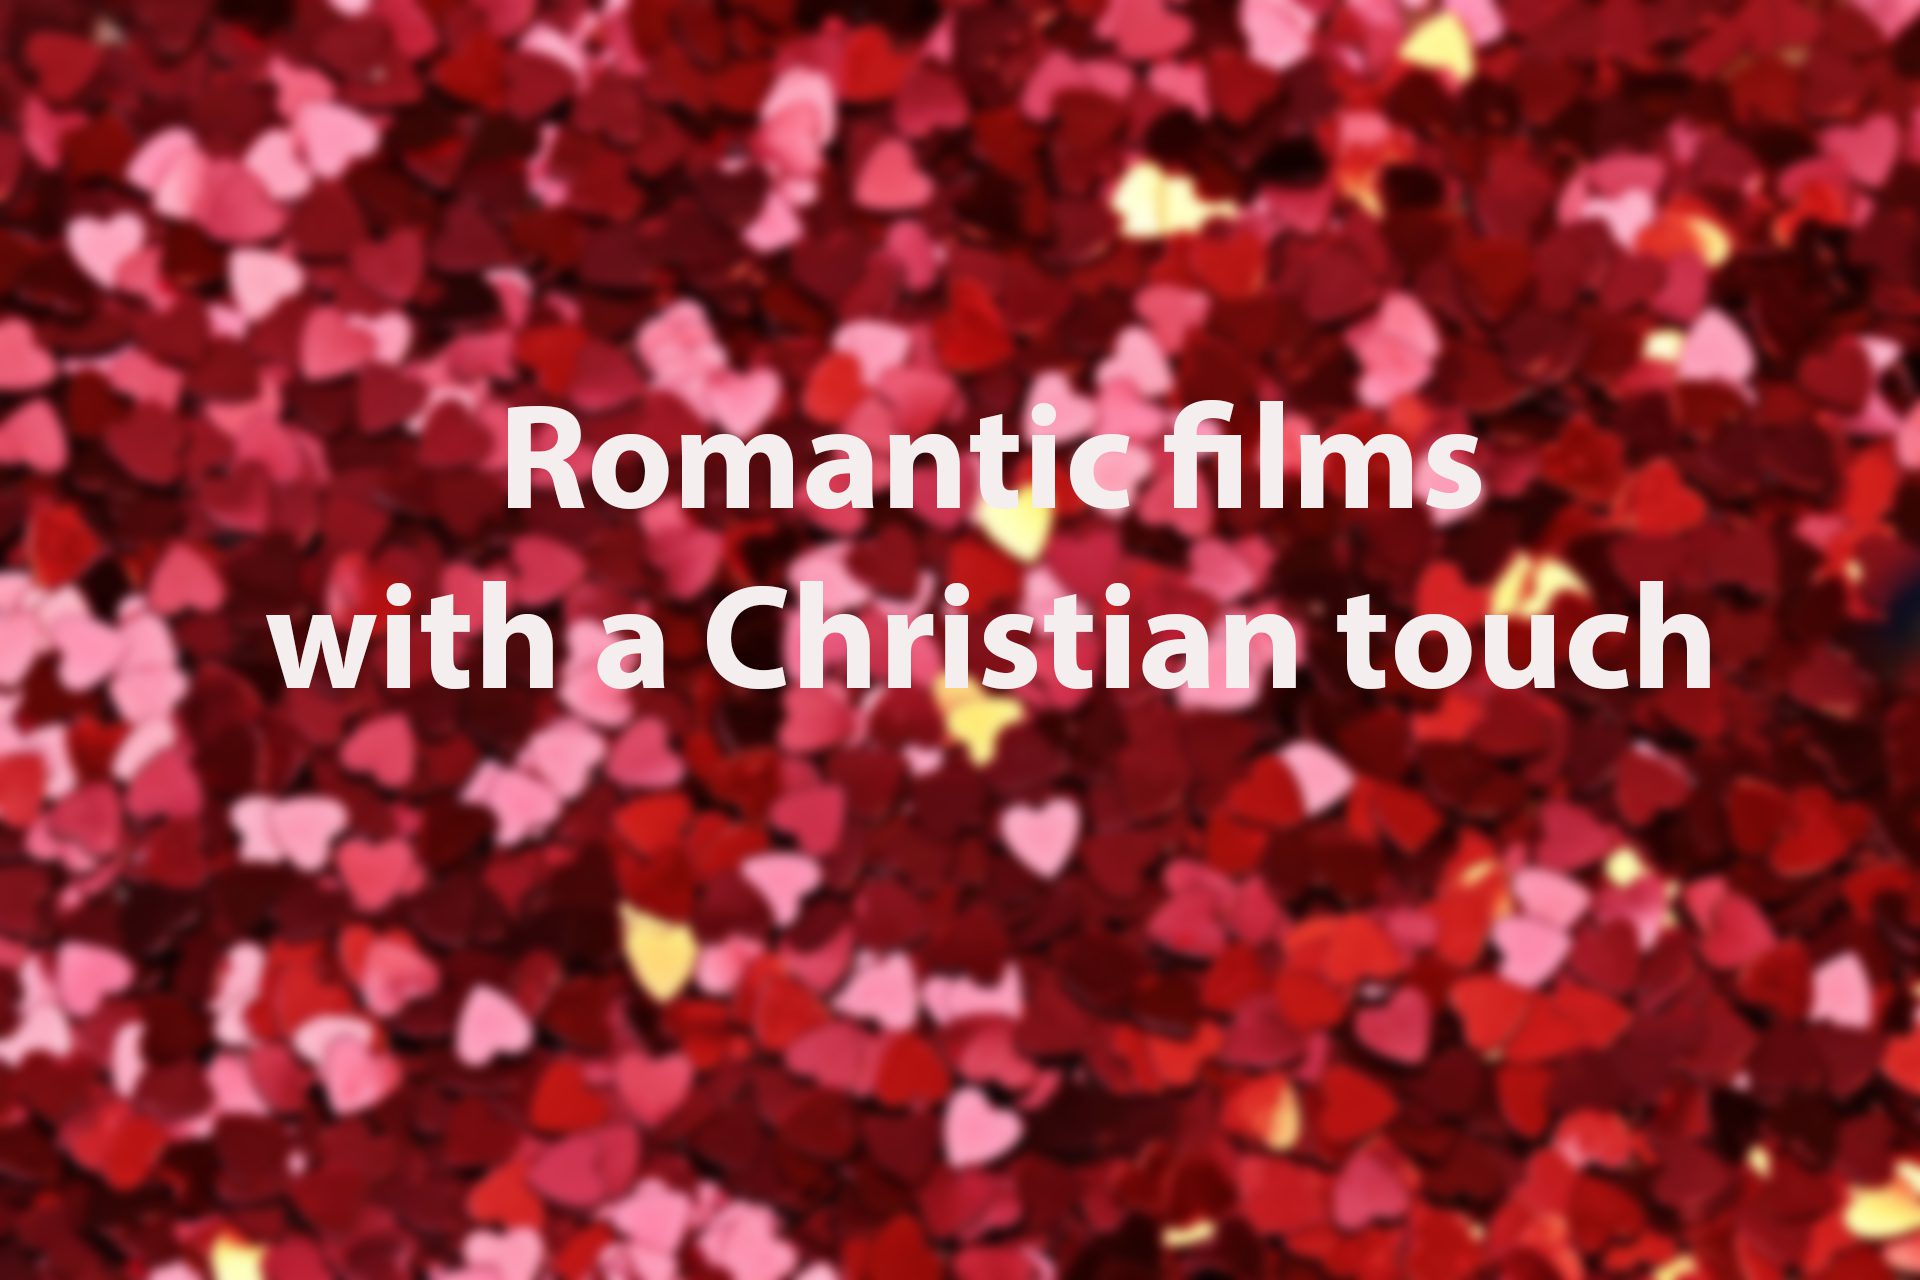 Valentine films with a Christian touch